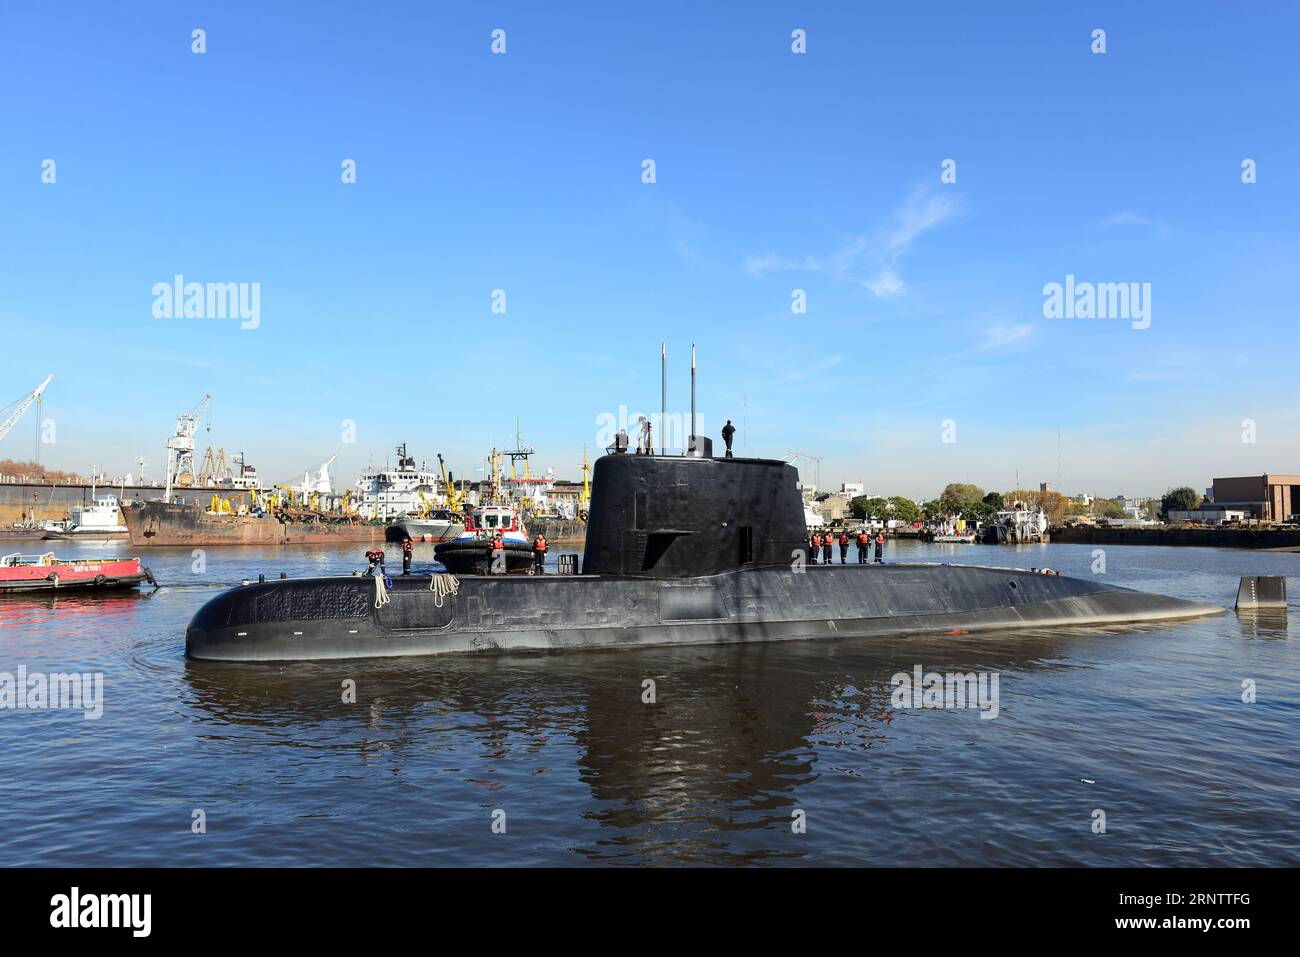 (171118) -- BUENOS AIRES, Nov. 18, 2017 -- File photo taken on June 2, 2014 shows the Argentine submarine ARA San Juan. An Argentinean submarine has lost contact in the South Atlantic with 44 crew on board, military authorities said on Nov. 17, 2017. The ARA San Juan was carrying out a surveillance mission in Argentina s exclusive economic zone near Puerto Madryn, around 1,400 km south of Buenos Aires. /Argentinean Army/Juan Sebastian Lobos) FILE-ARGENTINA-SUBMARINE-ARA SAN JUAN-CONTACT-LOSING TELAM PUBLICATIONxNOTxINxCHN Stock Photo